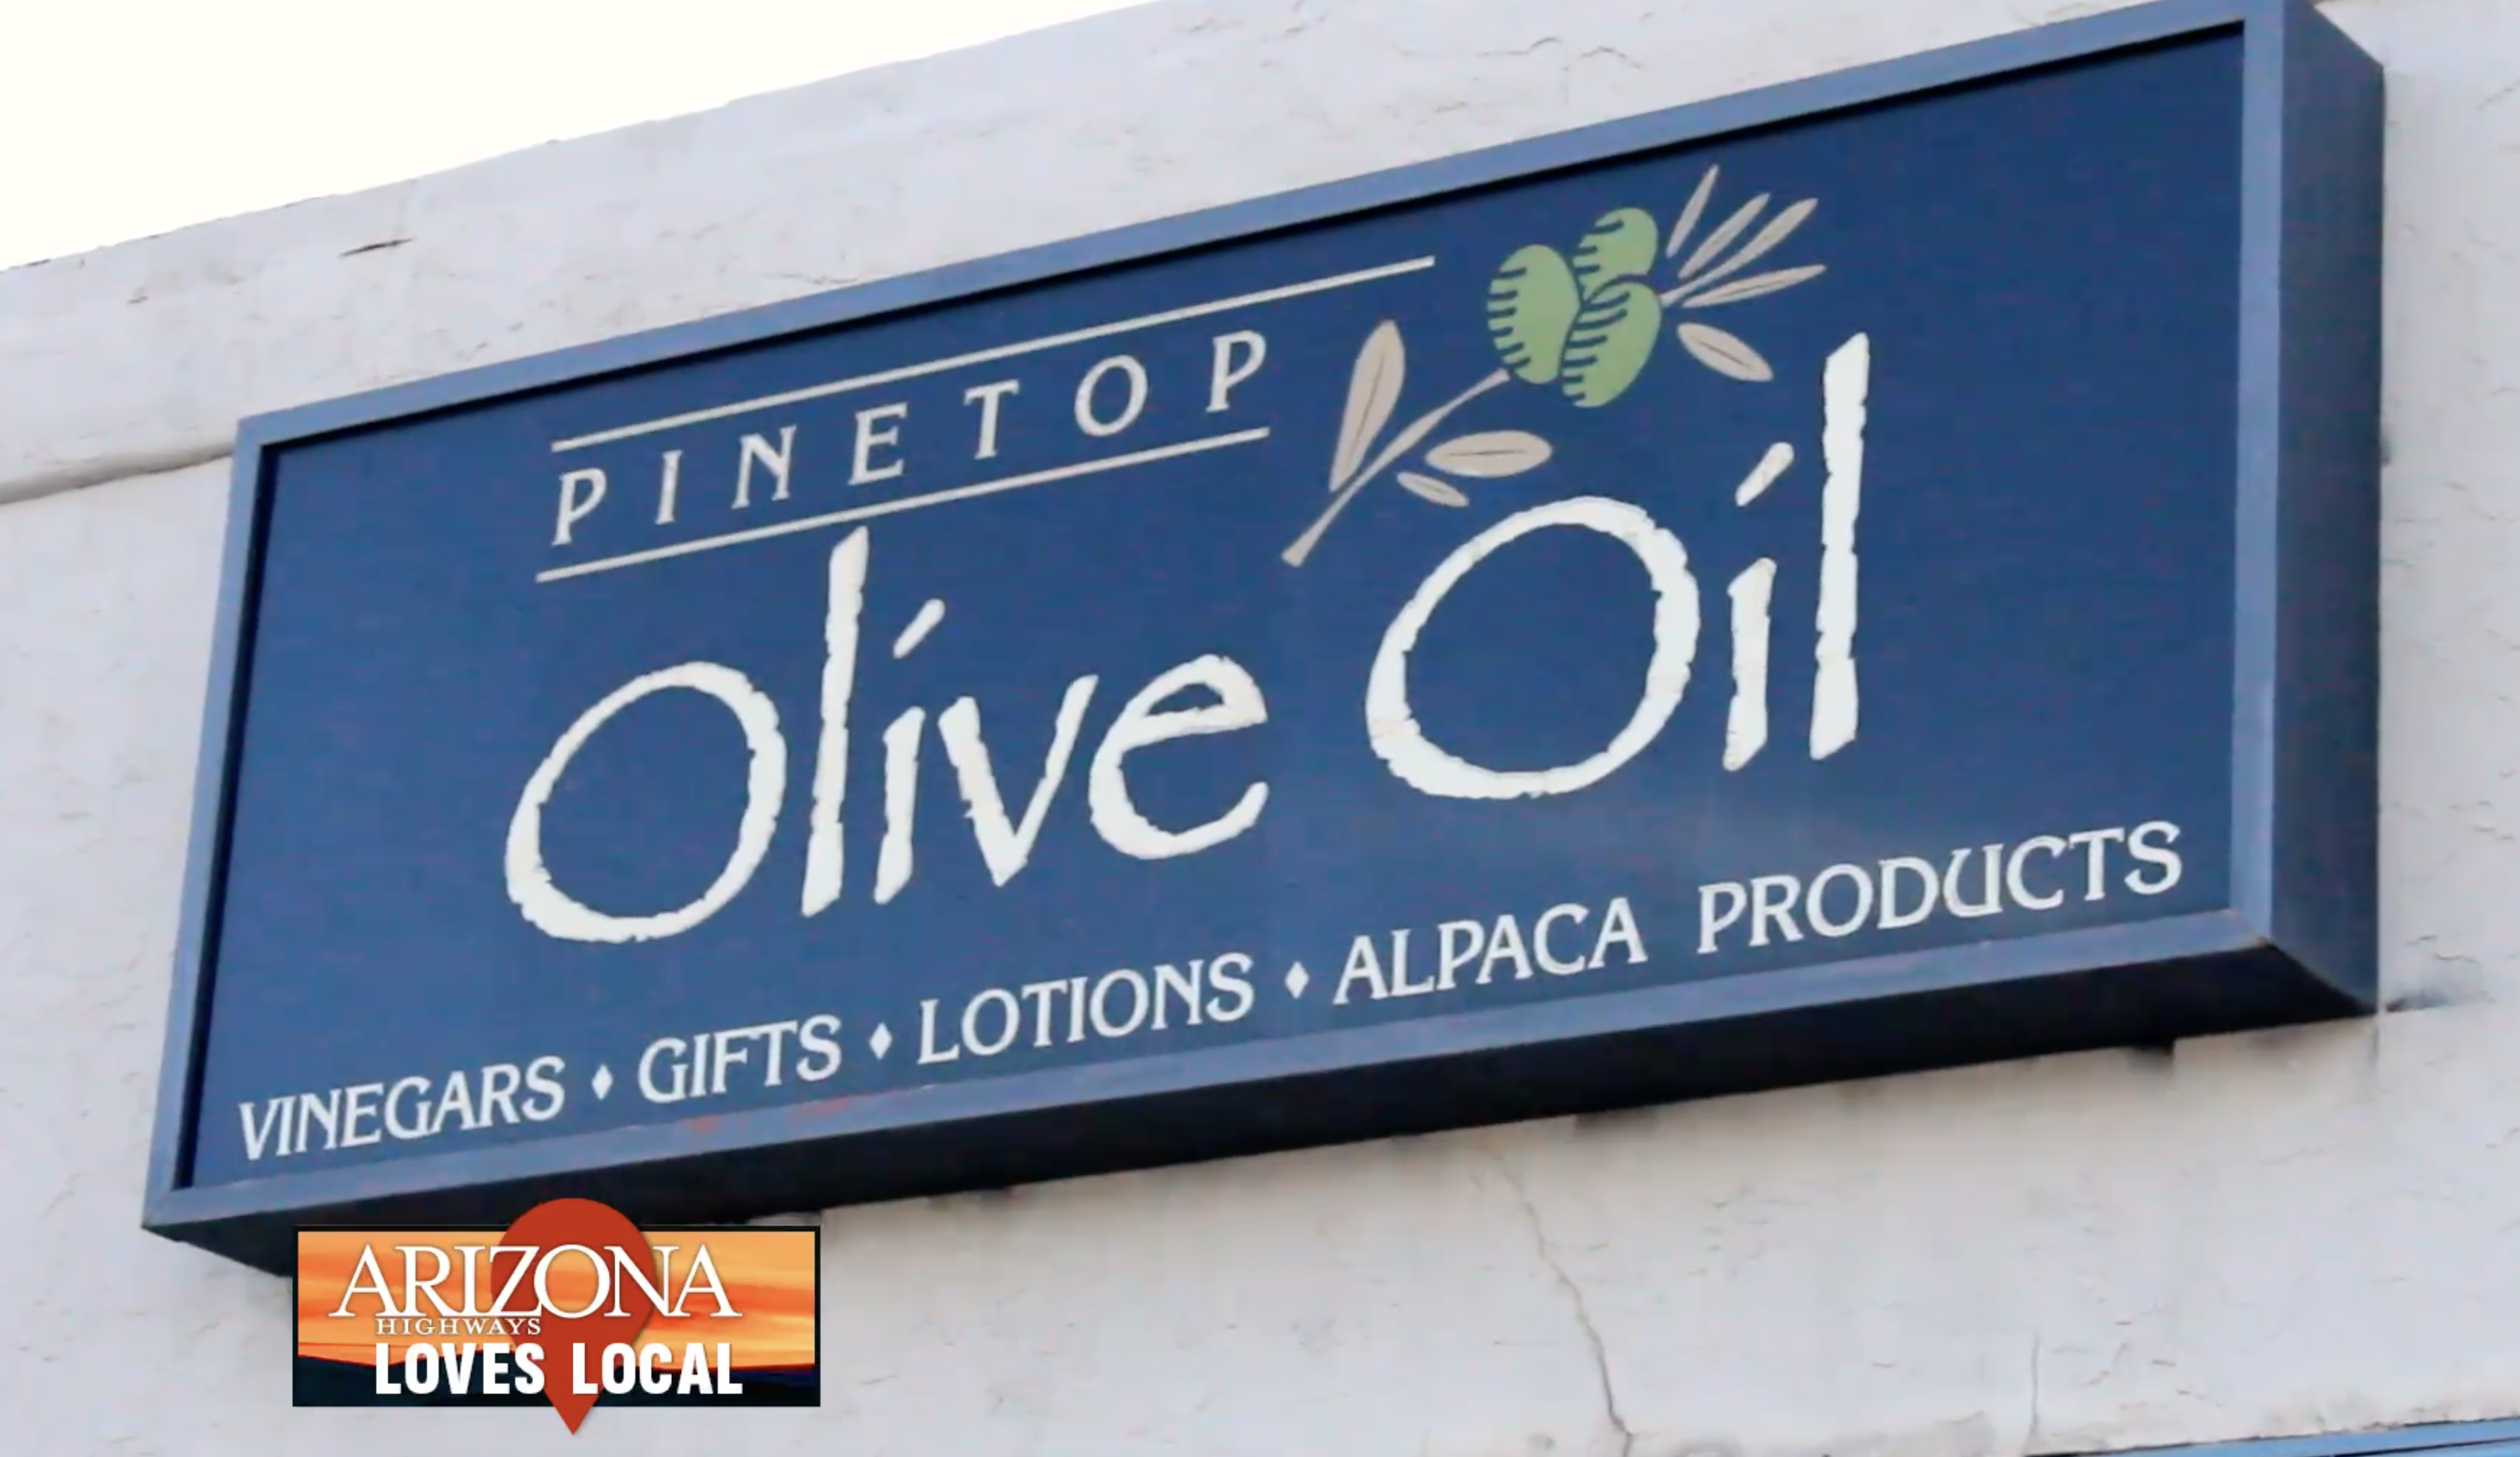 pinetop olive oil